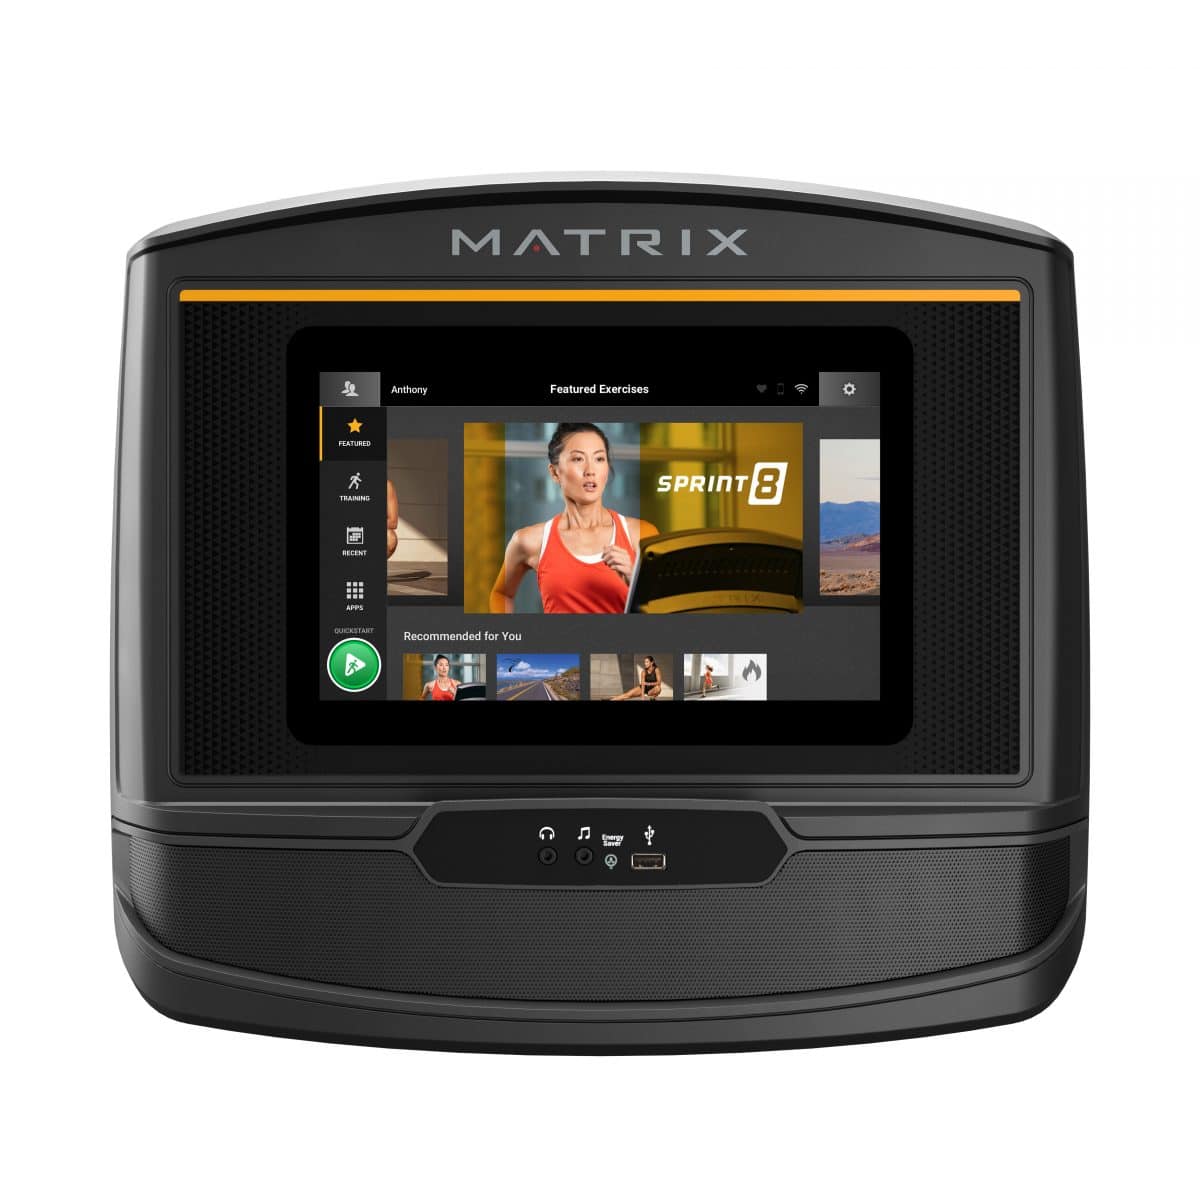 A matrix fitness machine with an image of a woman on it.